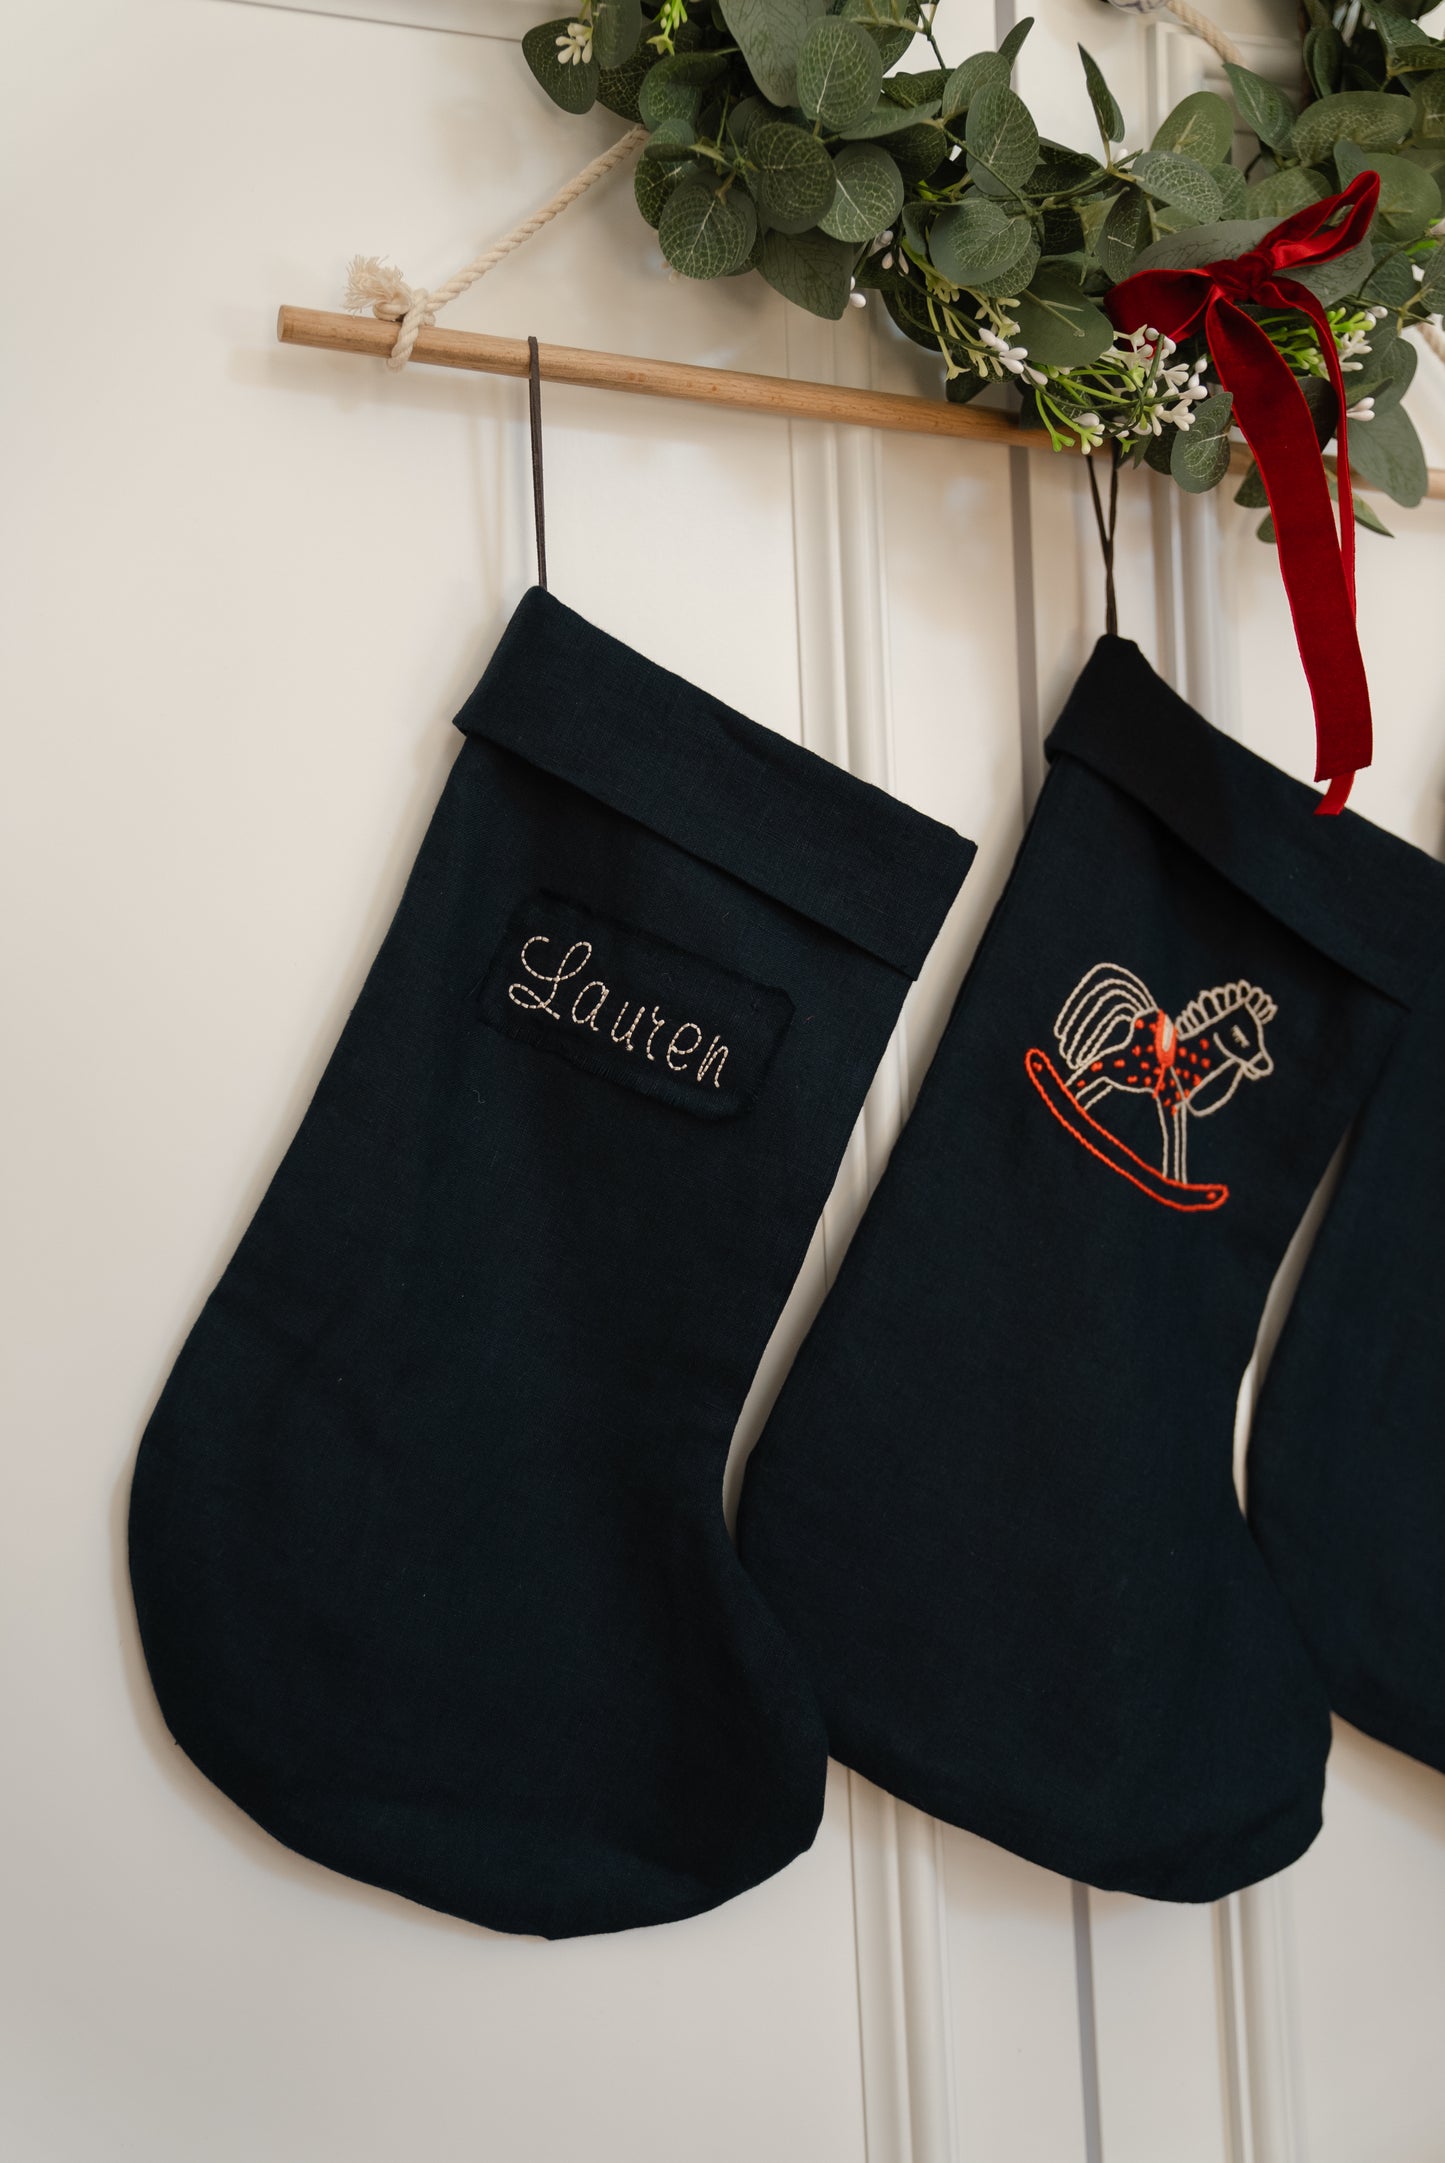 Hand embroidered stocking